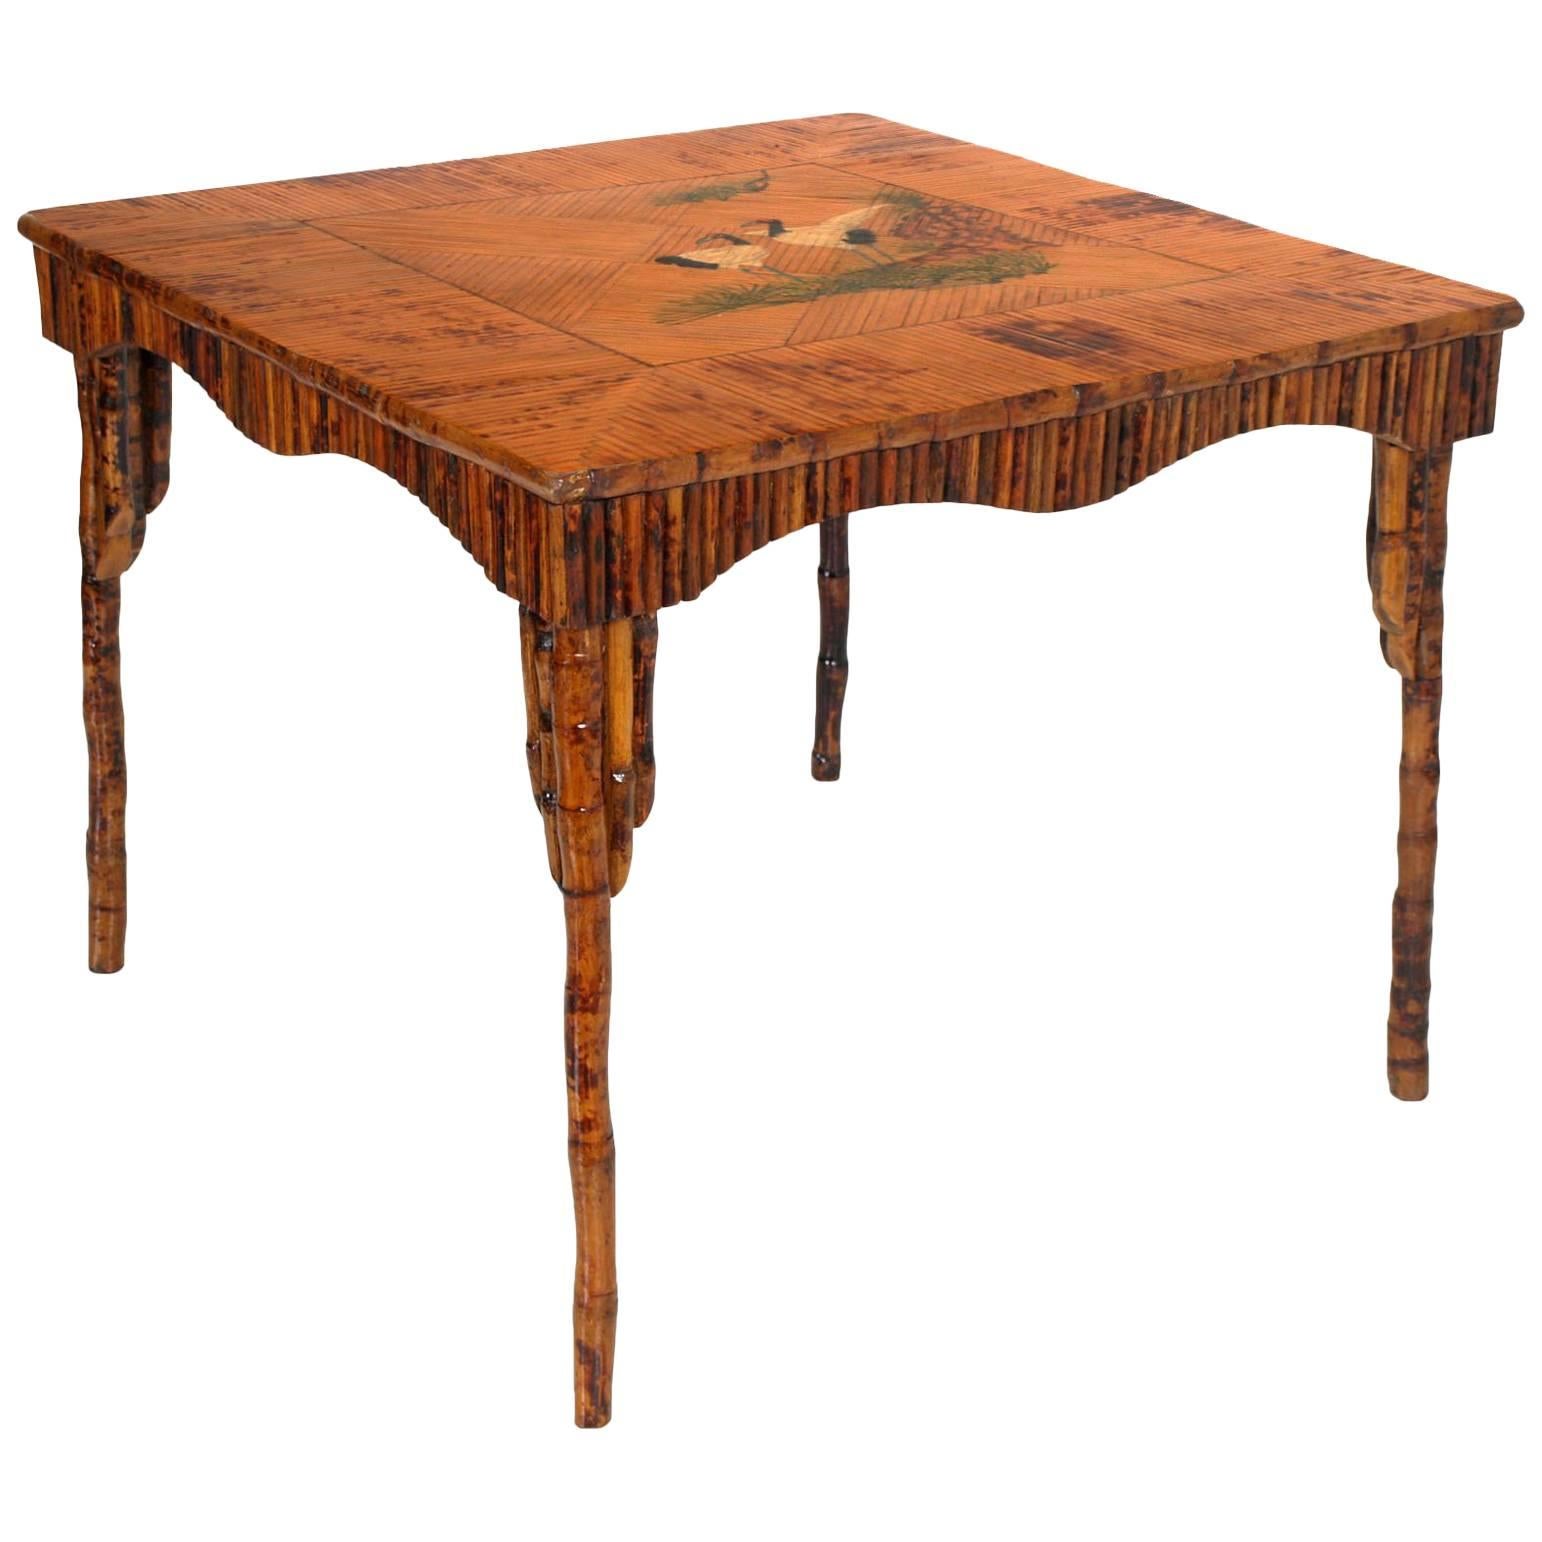 Precious Art Deco Chinoiserie Table from the 1920s, in beech wood hand-carved  For Sale